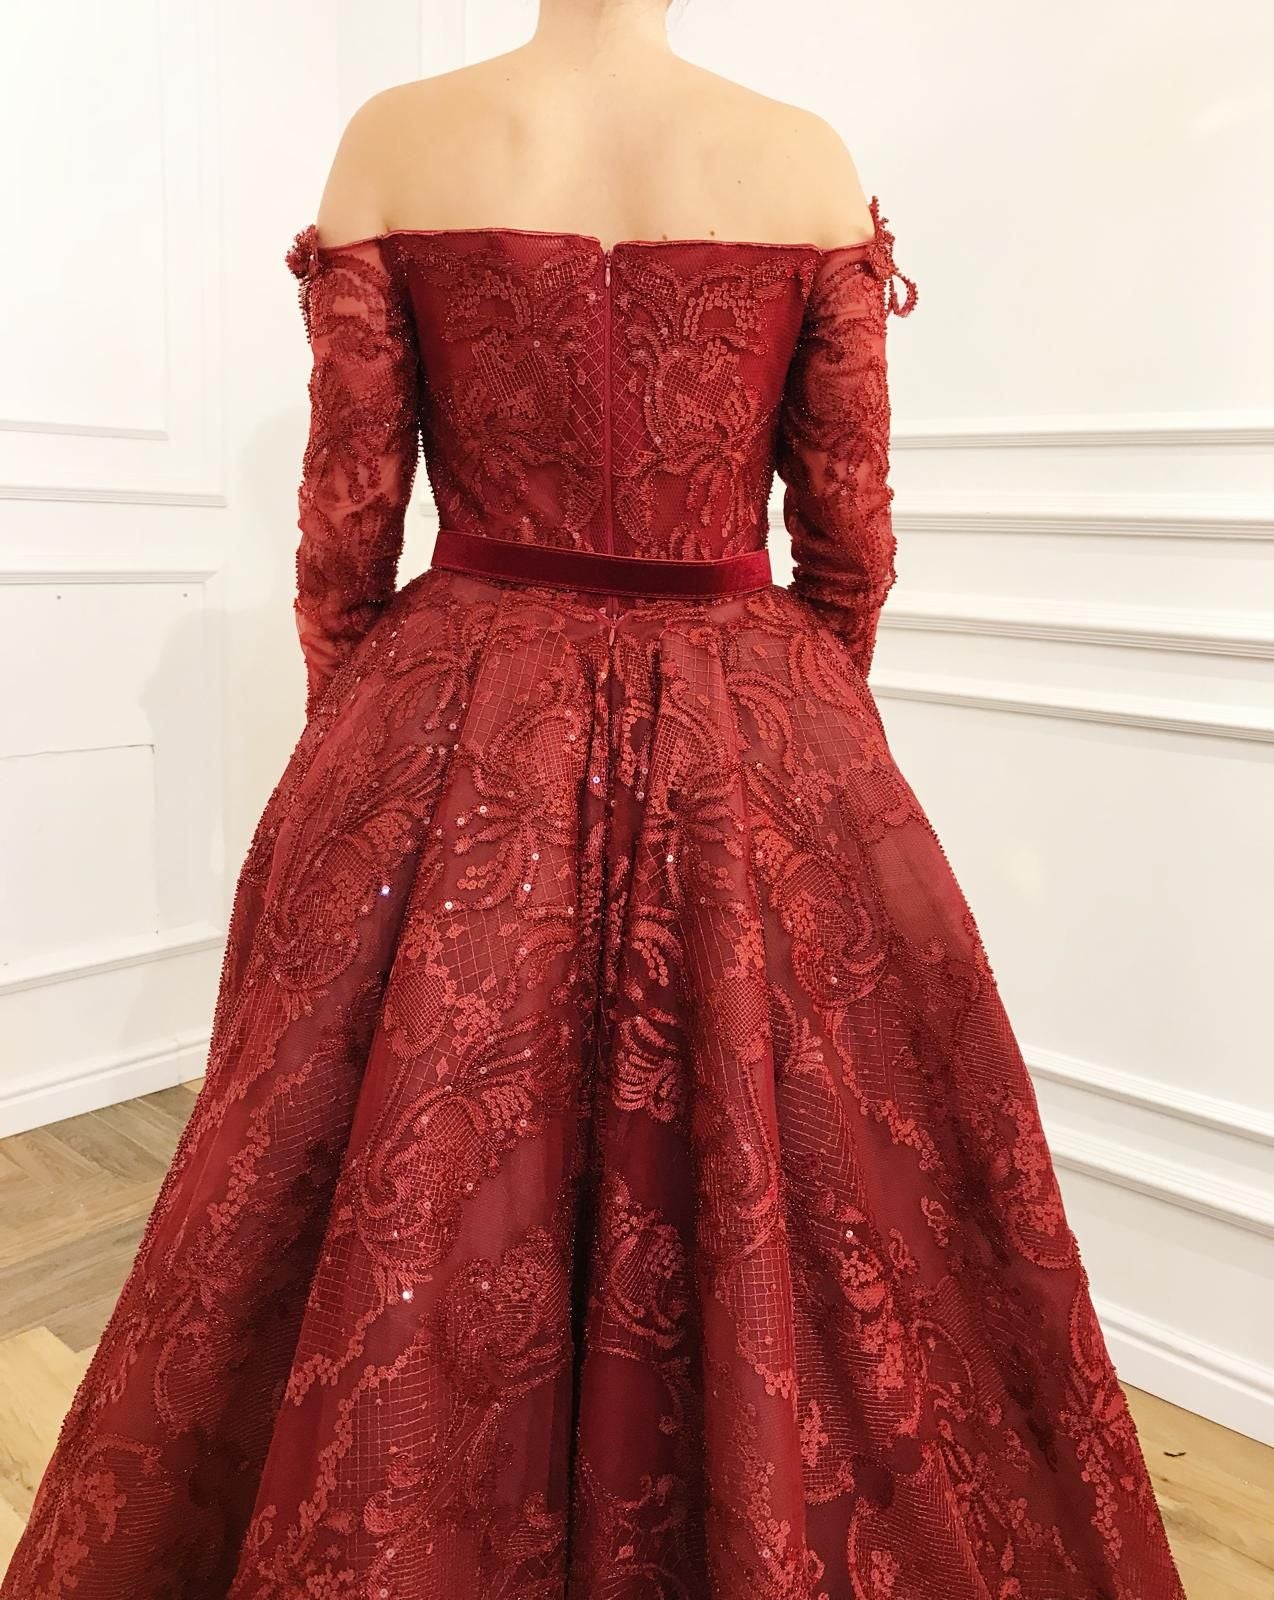 Red overskirt dress with lace, embroidery, belt and long off the shoulder sleeves